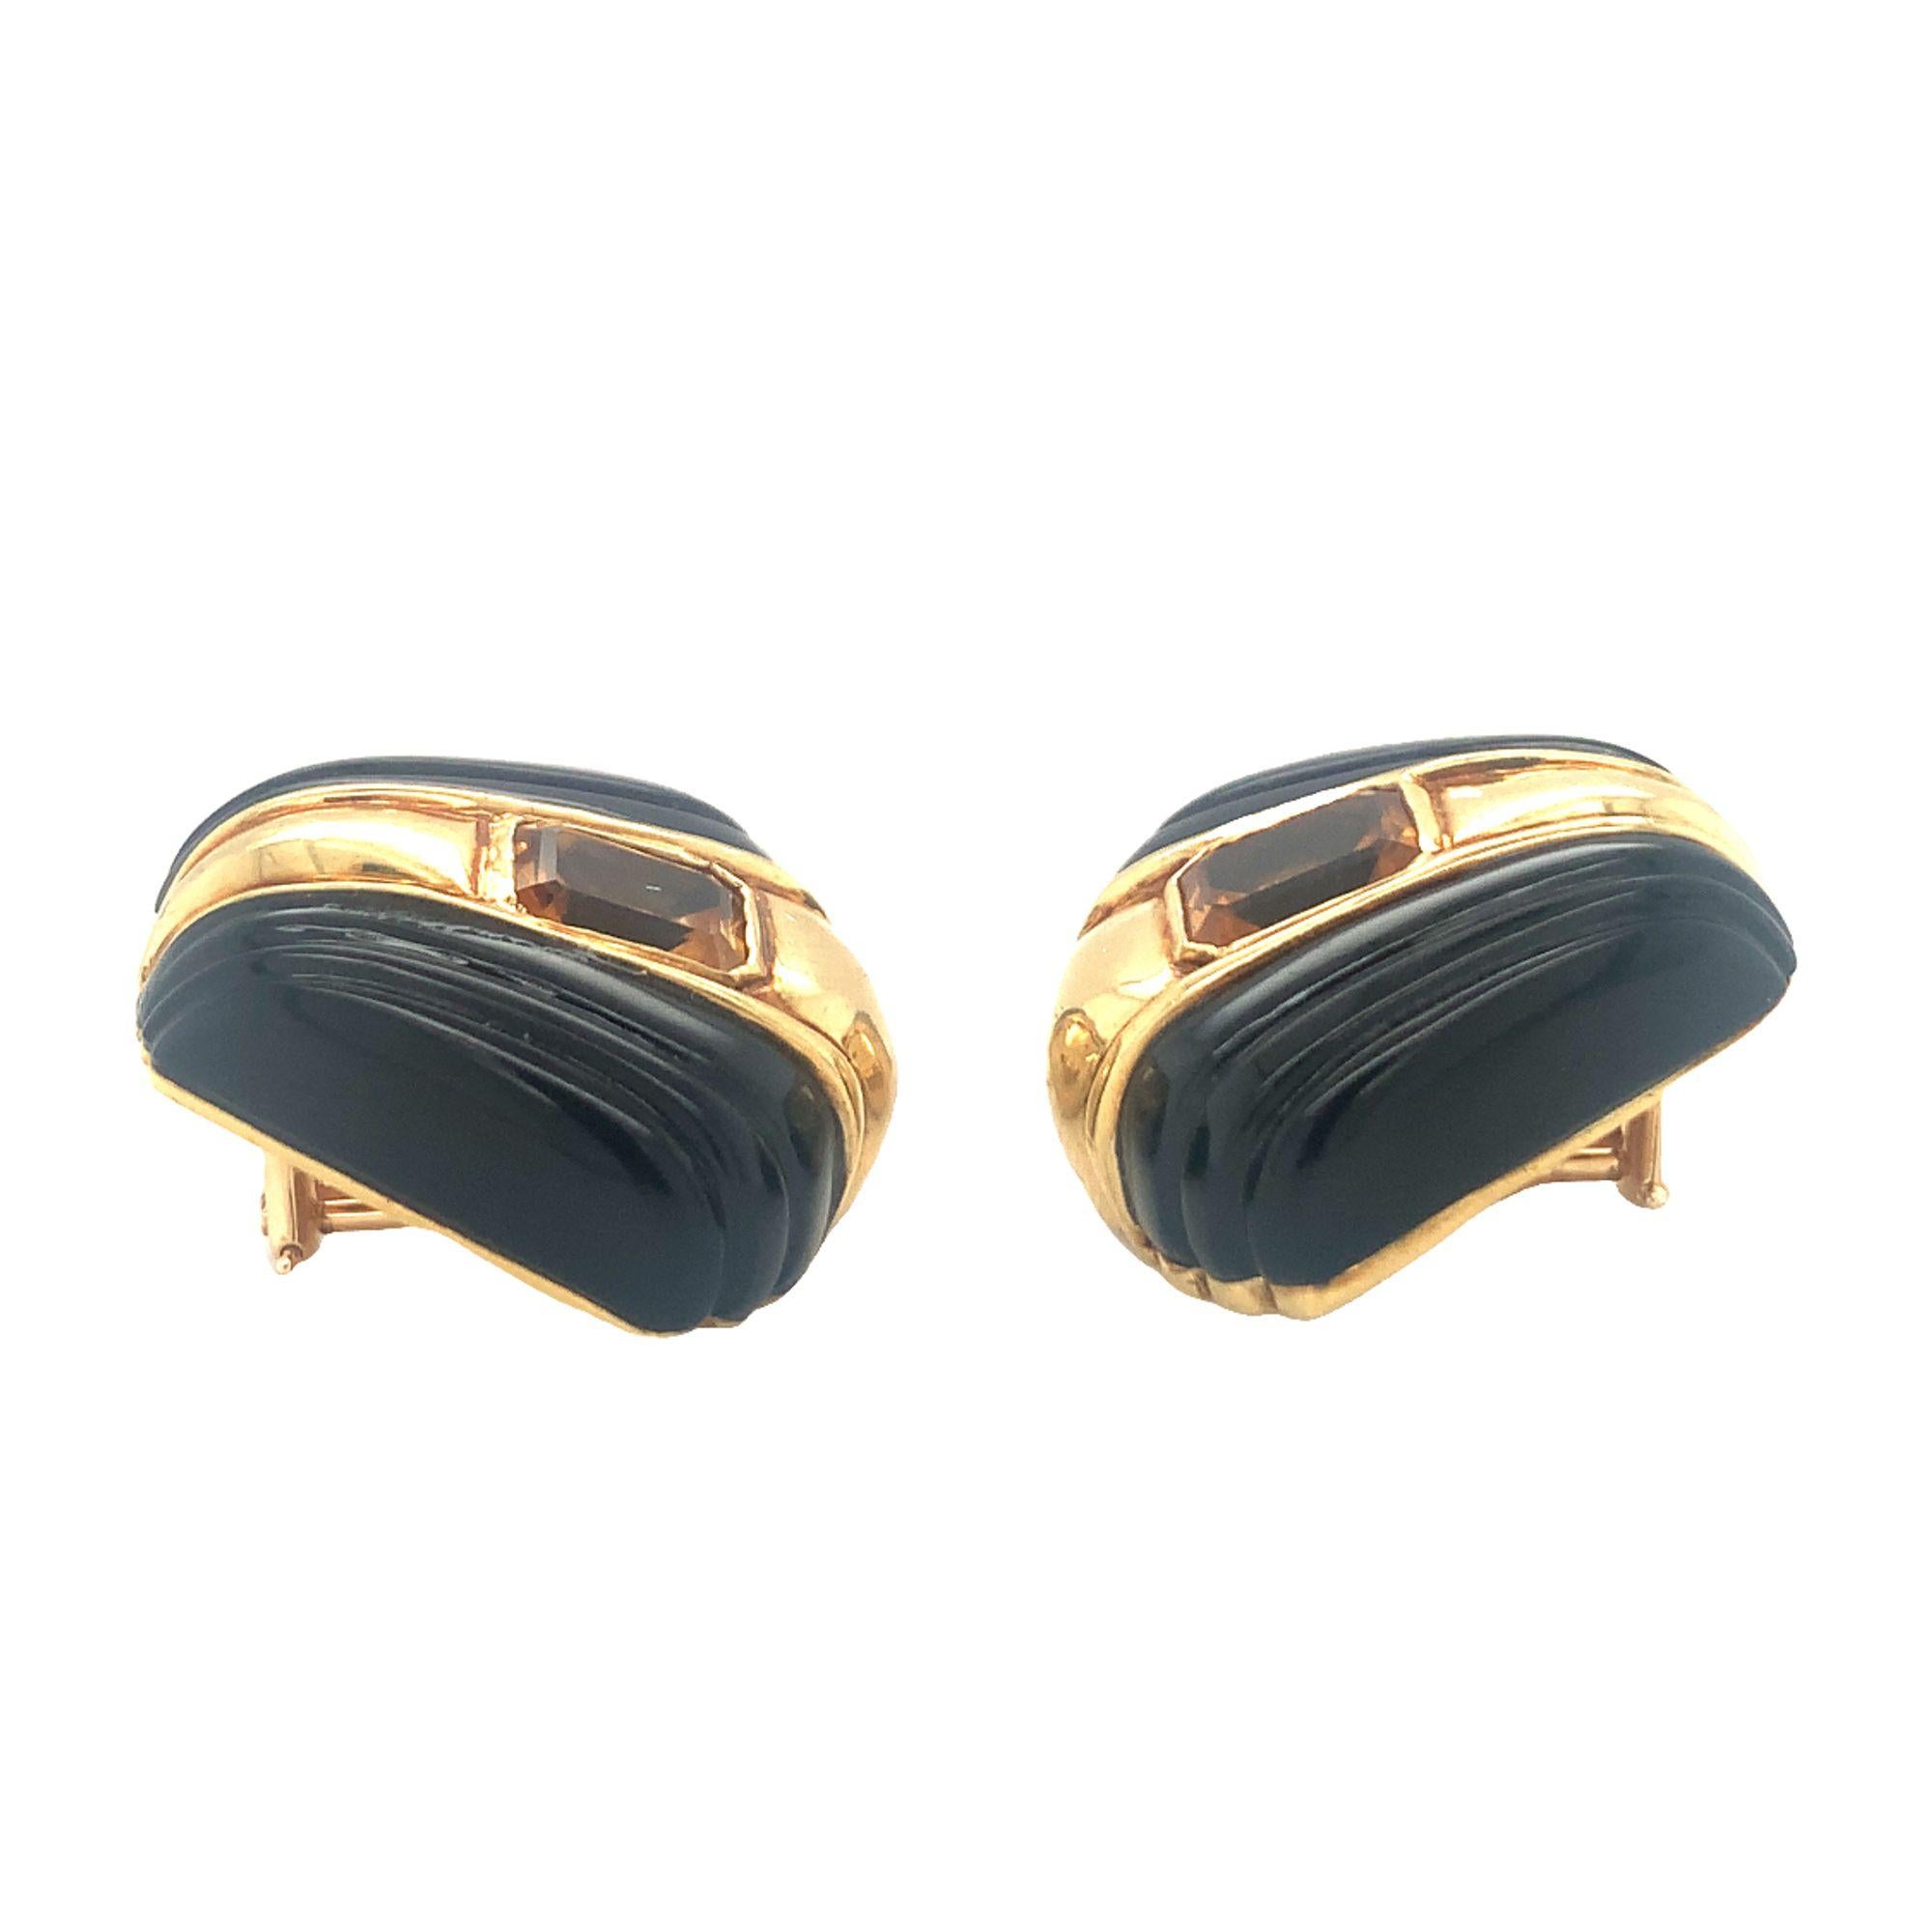 One pair of citrine and black onyx 18K yellow gold earclips featuring fluted black onyx portions and two bezel set, emerald-cut citrines totaling 4 ct. Circa 1970s.

Contrasting, fluted, dashing.

Additional information:
Metal: 18K yellow